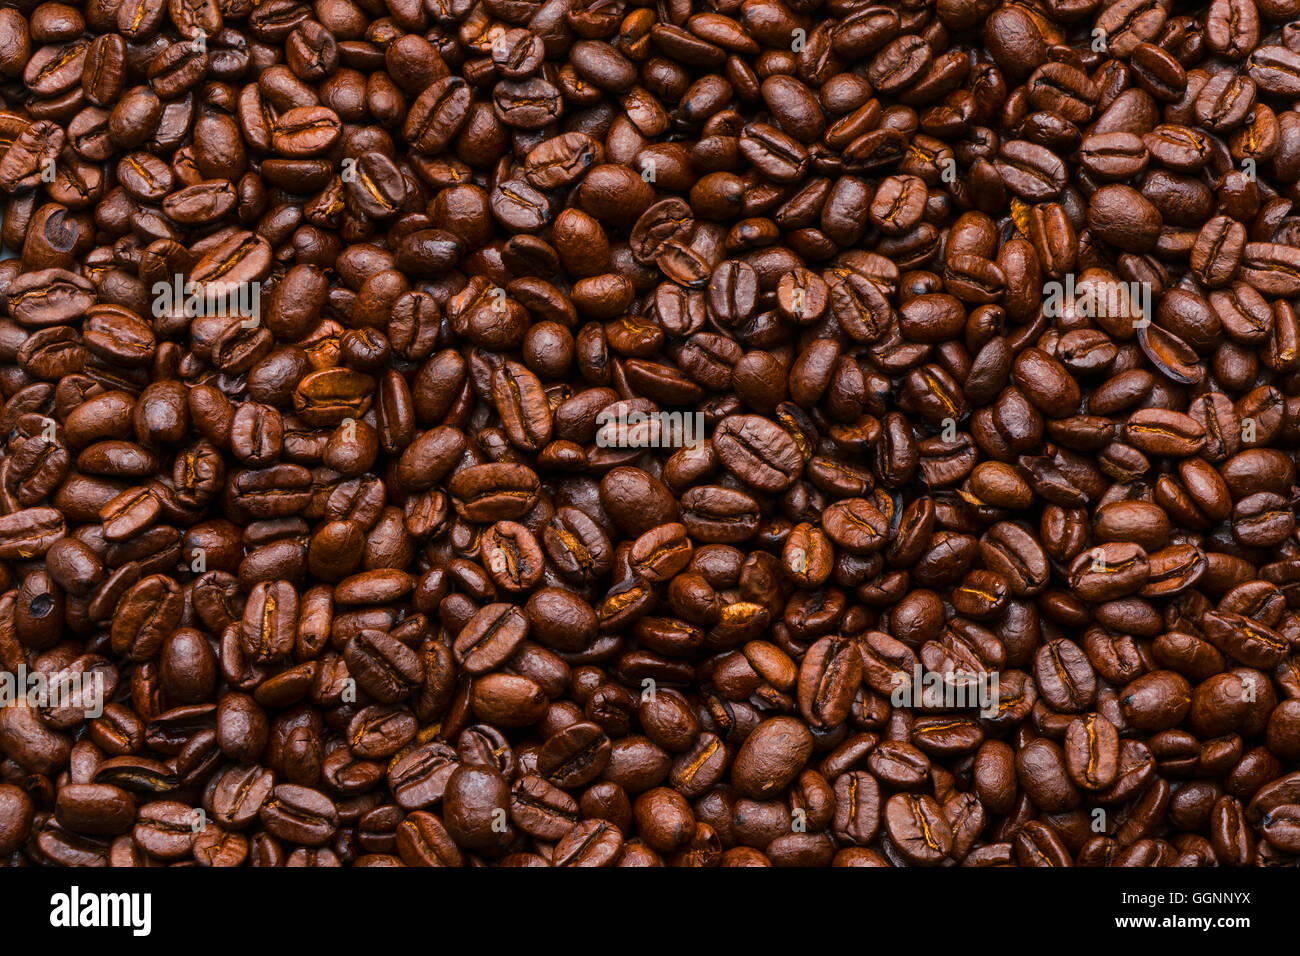 Pile of brown roasted coffee beans Stock Photo